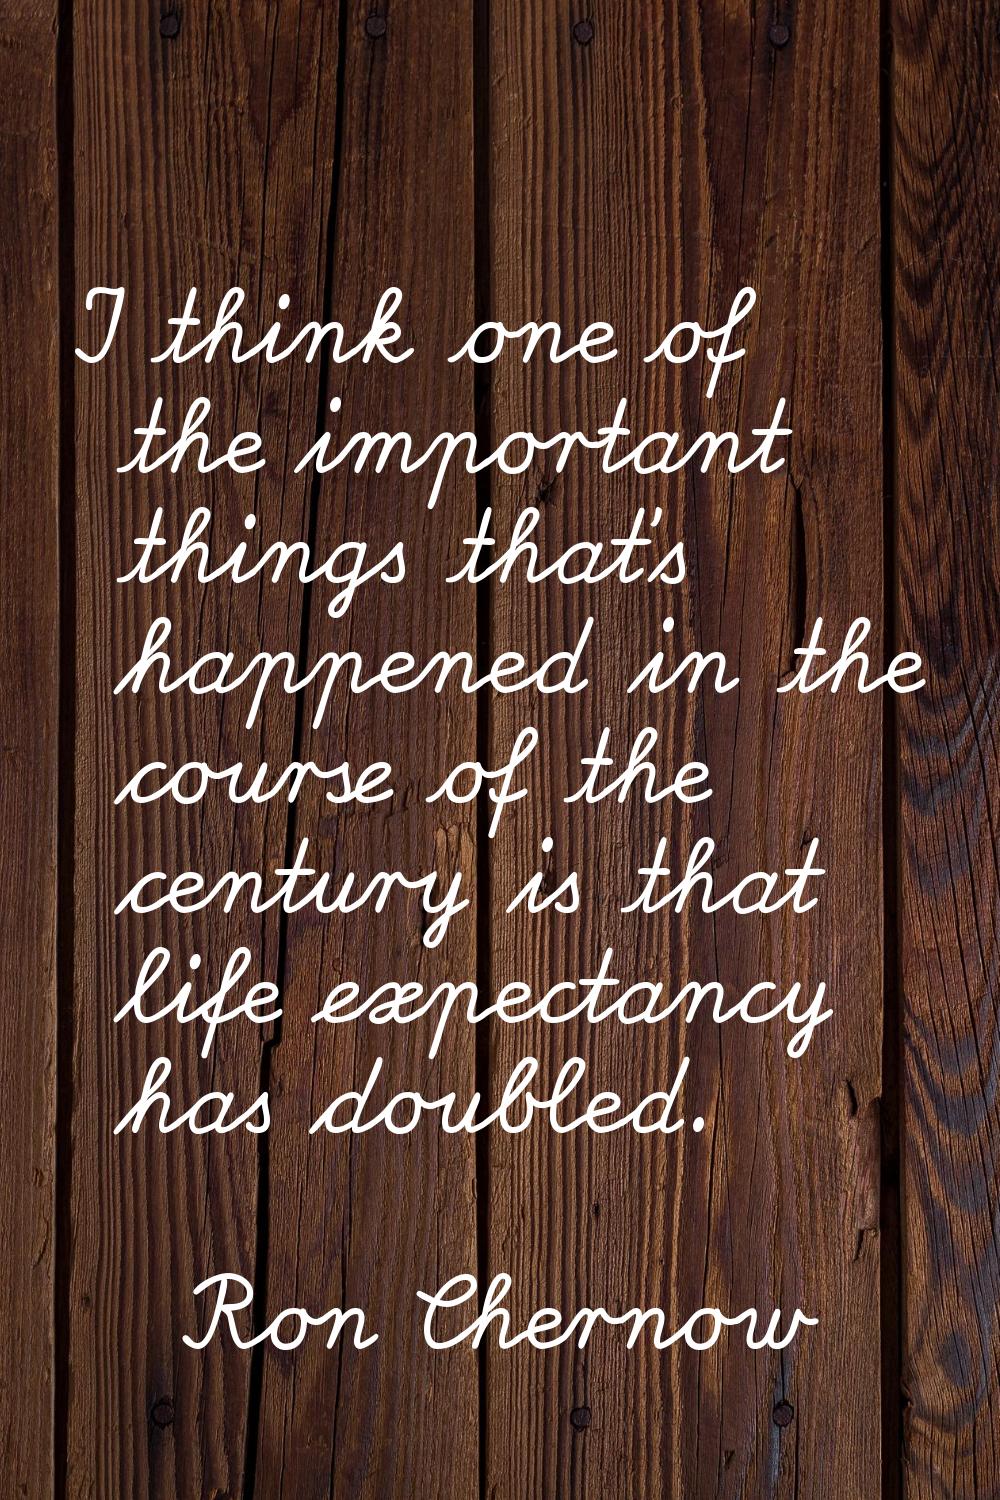 I think one of the important things that's happened in the course of the century is that life expec